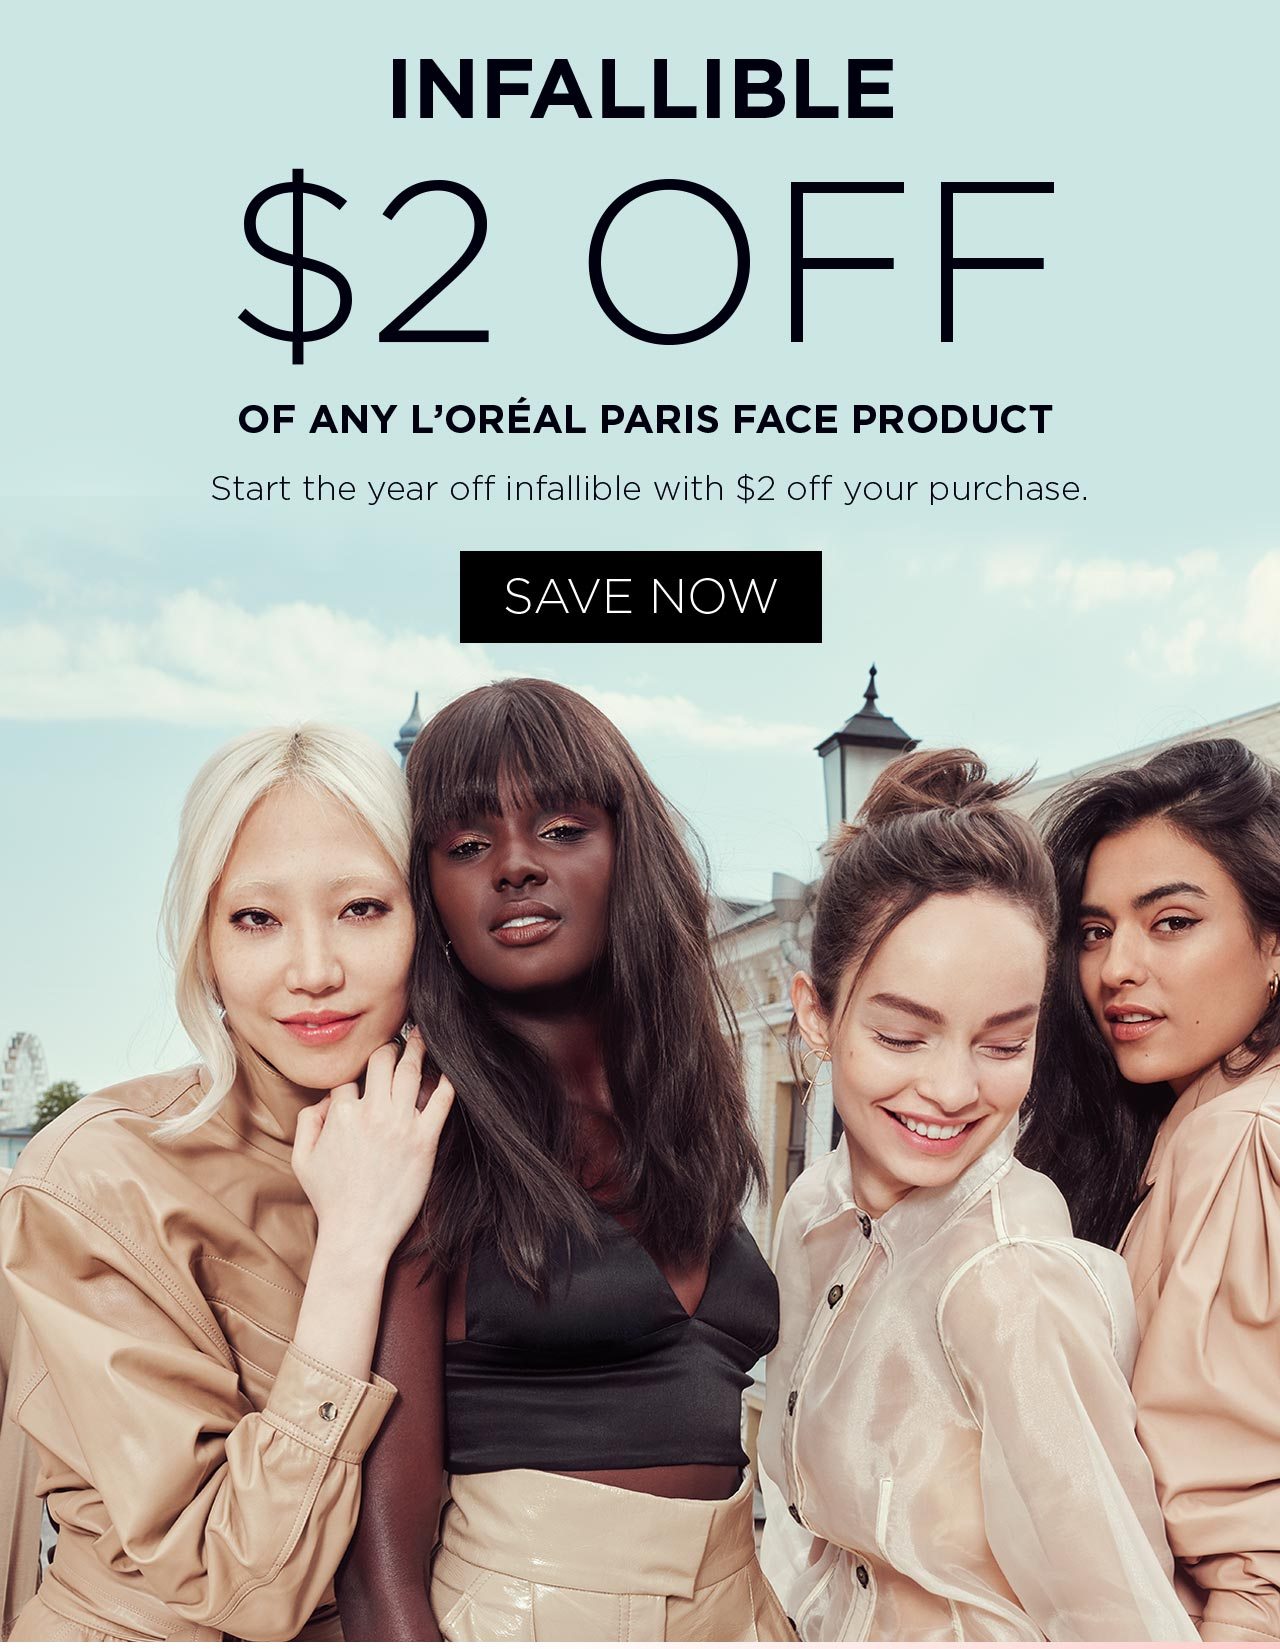 INFALLIBLE - $2 OFF OF ANY L’ORÉAL PARIS FACE PRODUCT - Start the year off infallible with $2 off your purchase. - SAVE NOW